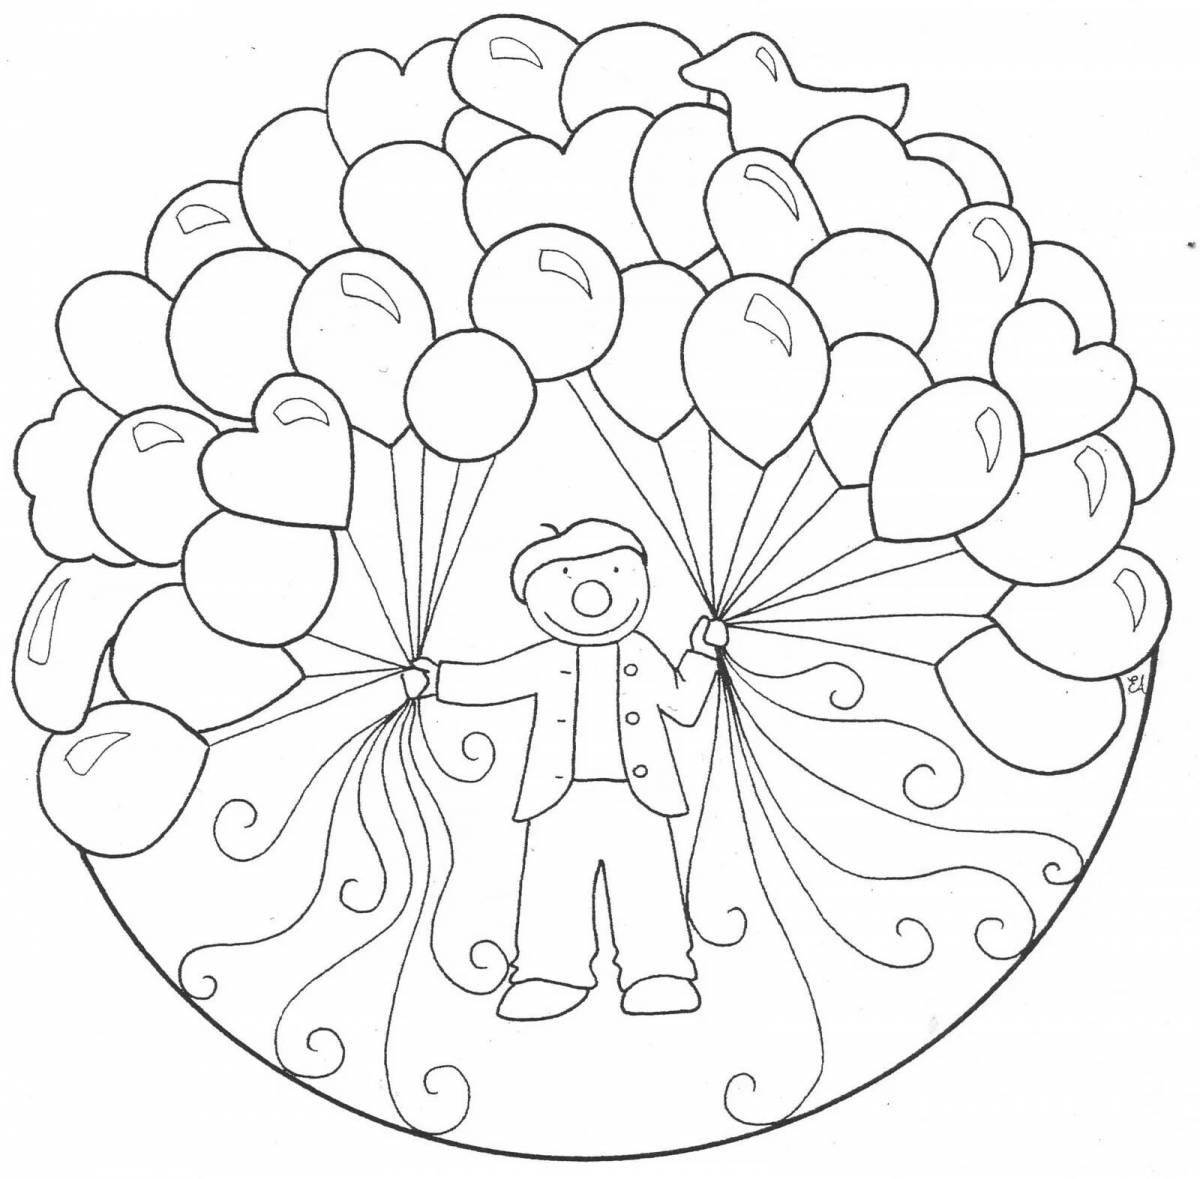 Fun mandala coloring pages for 5-6 year olds